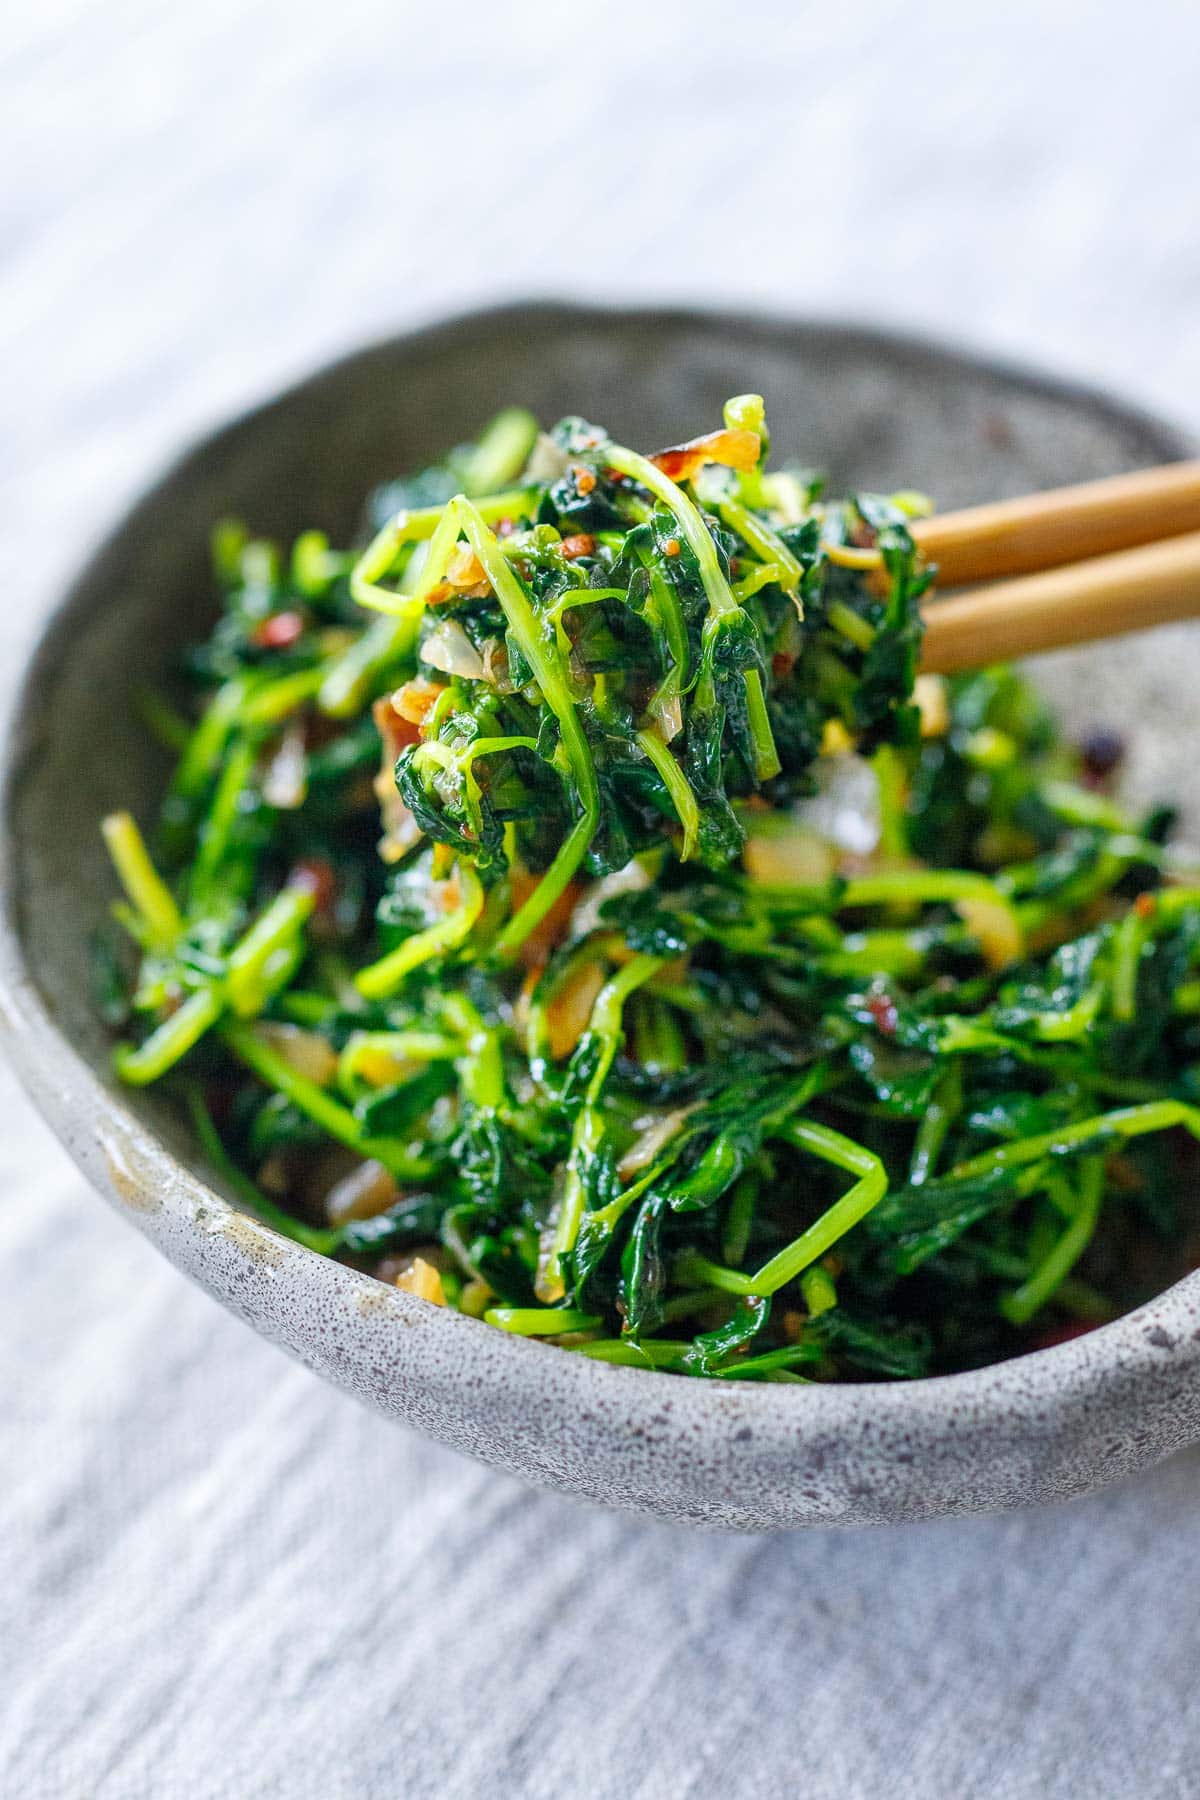 Wondering what to do with young pea shoots? These stir fried pea shoots are incredibly easy to make and full of flavor; a tasty spring side dish that comes together in 15 minutes!